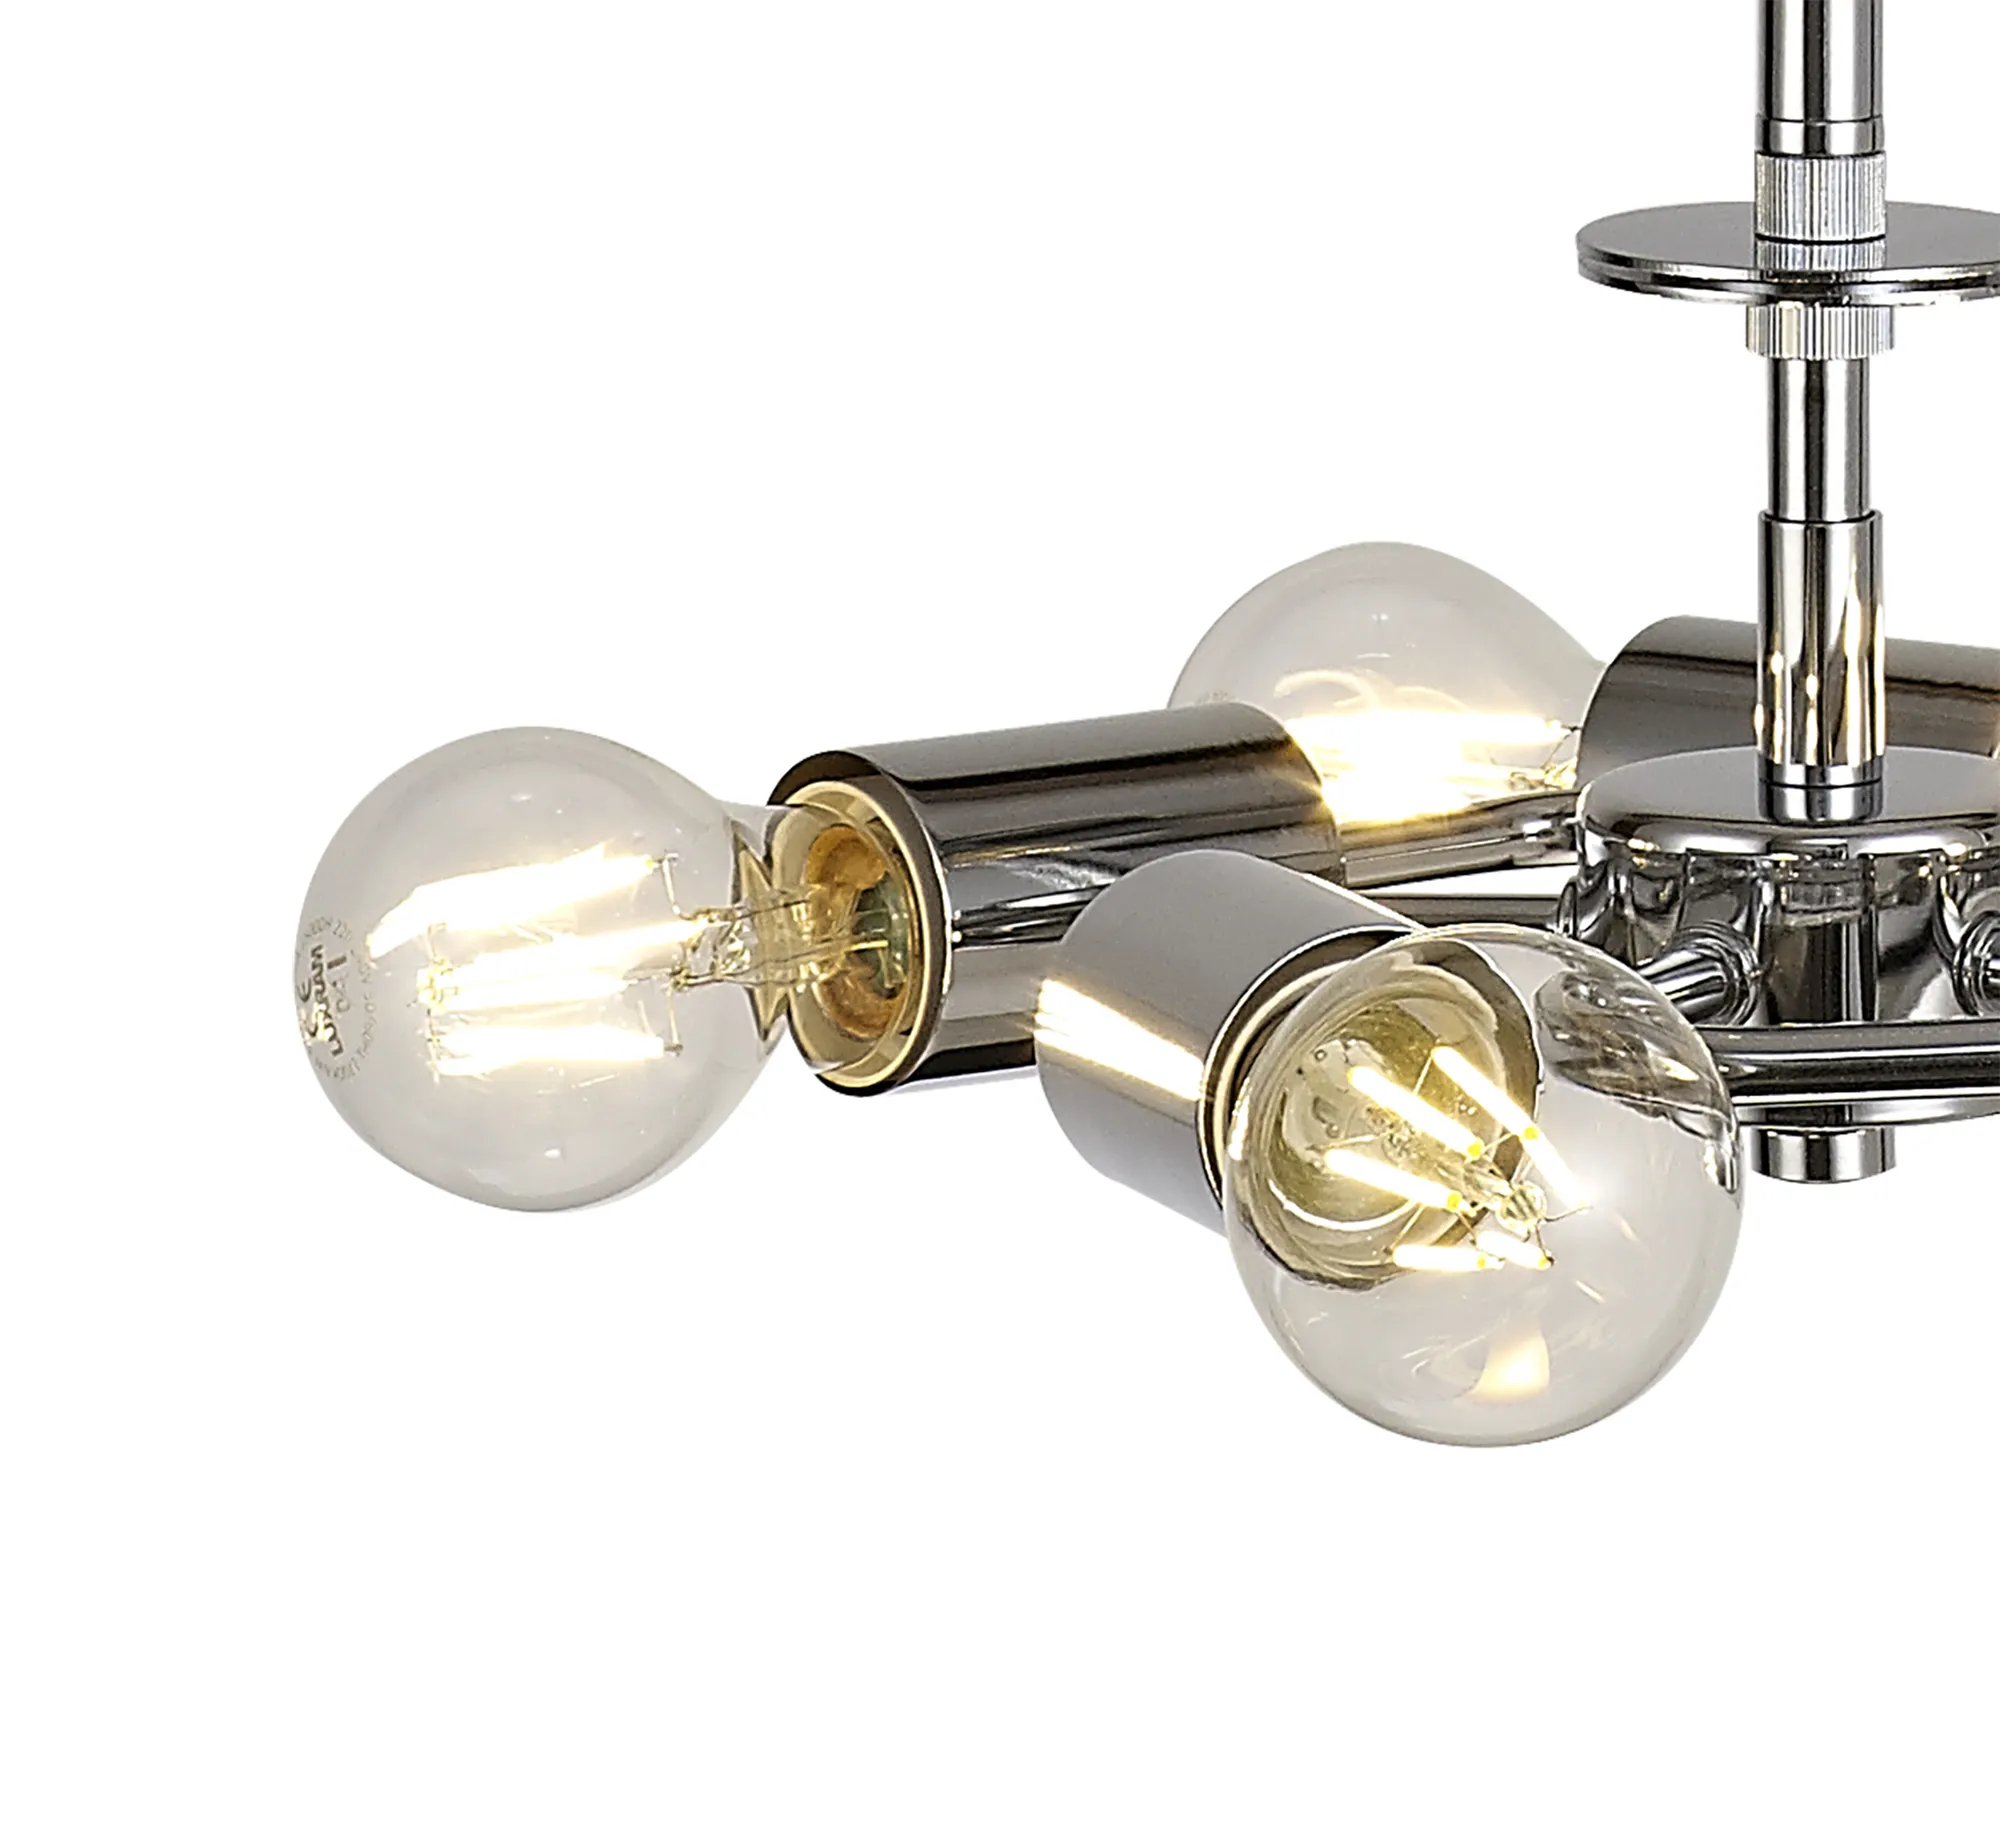 Baymont 60cm 5 Light Pendant Polished Chrome; Taupe/Halo Gold; Frosted Diffuser DK0477  Deco Baymont CH TA